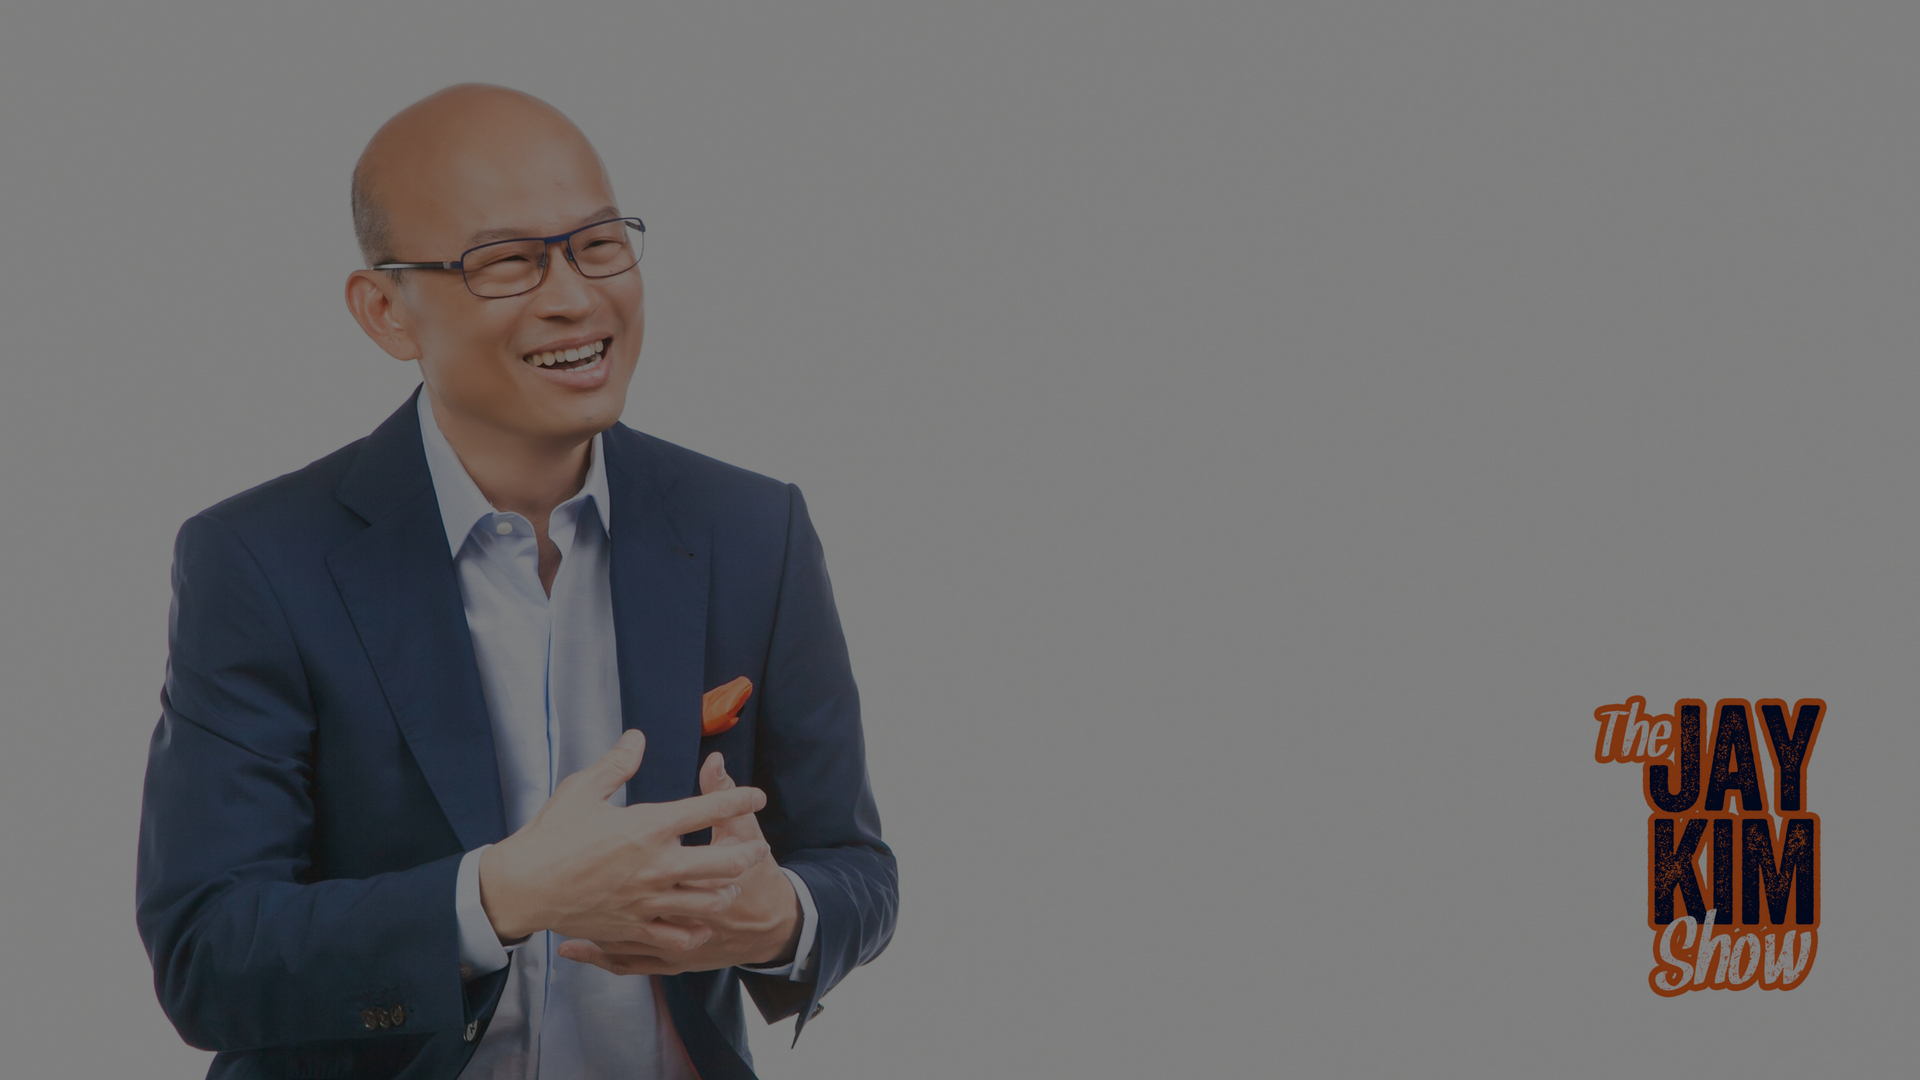 105: Peng T. Ong, serial entrepreneur, co-founder and managing partner of Monk’s Hill Ventures